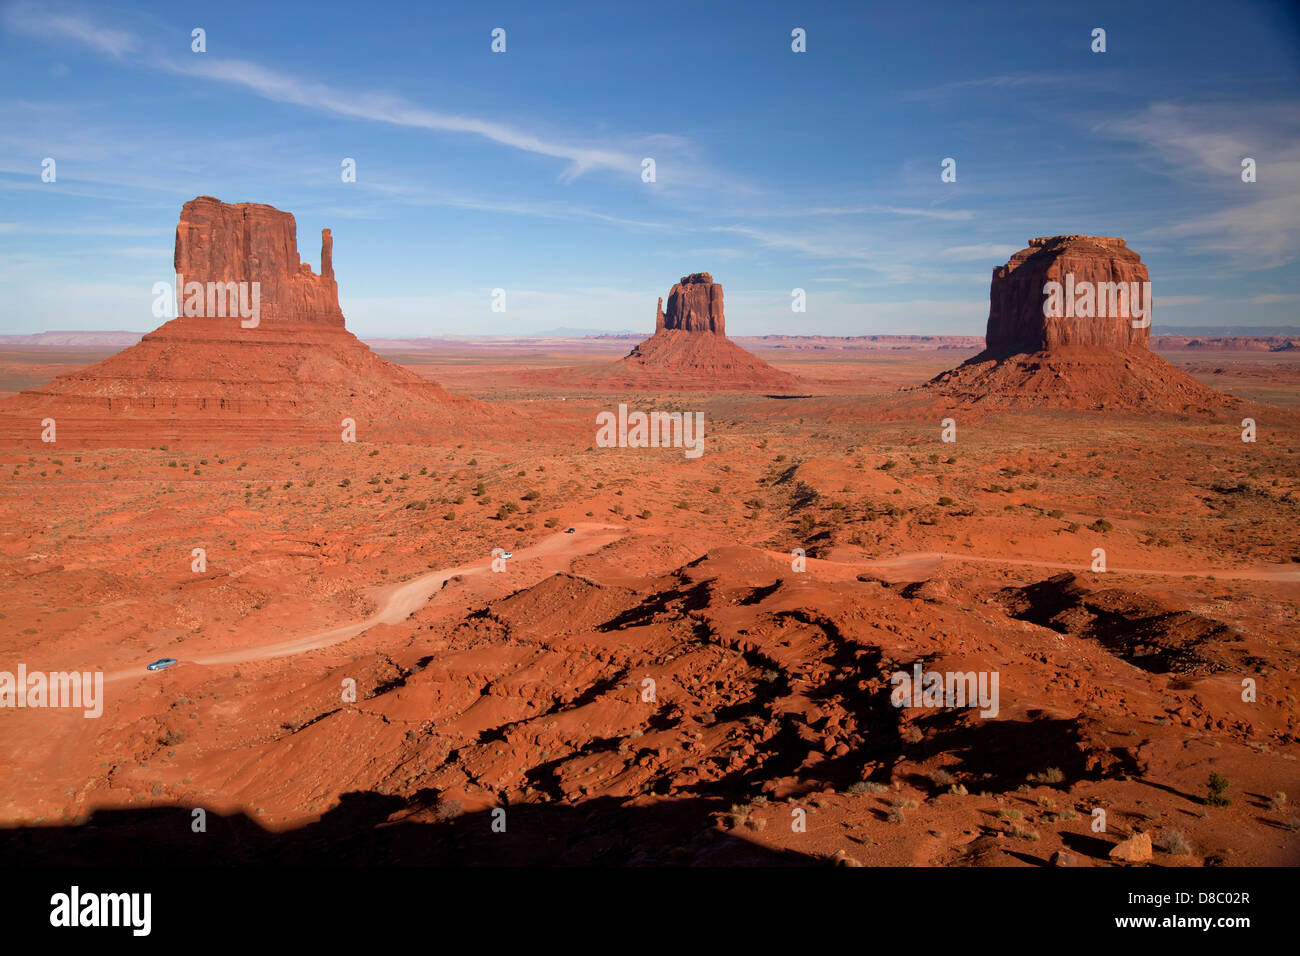 Monument Valley panorama taken from the Visitor Center showing the sandstone buttes 'Mittens' and the loop road , USA Stock Photo